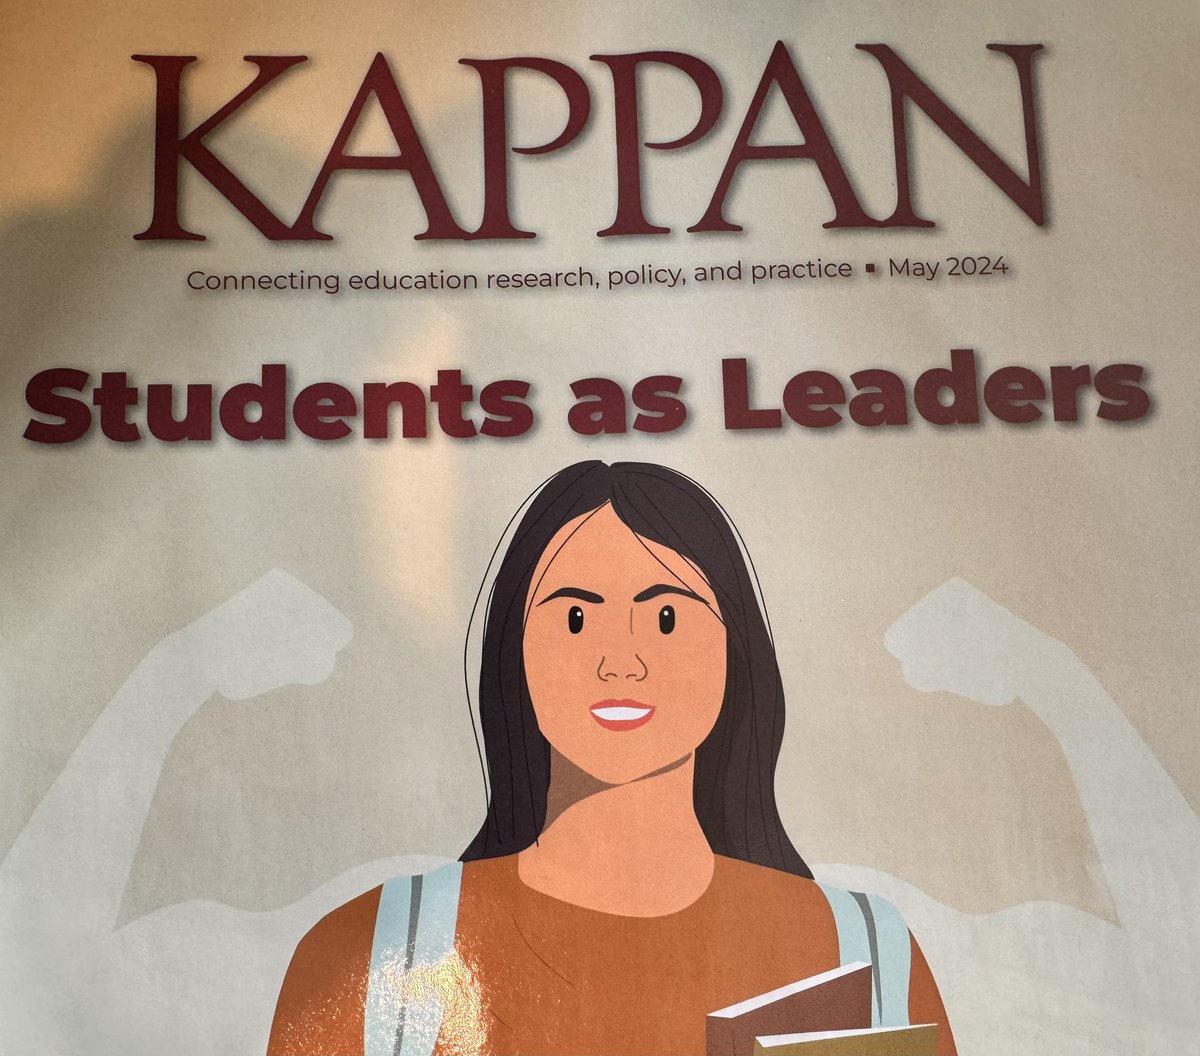 Got my May magazine in the mail today! Love that students and their voice are front and center! #kappanmag @pdkintl @EducatorsRising